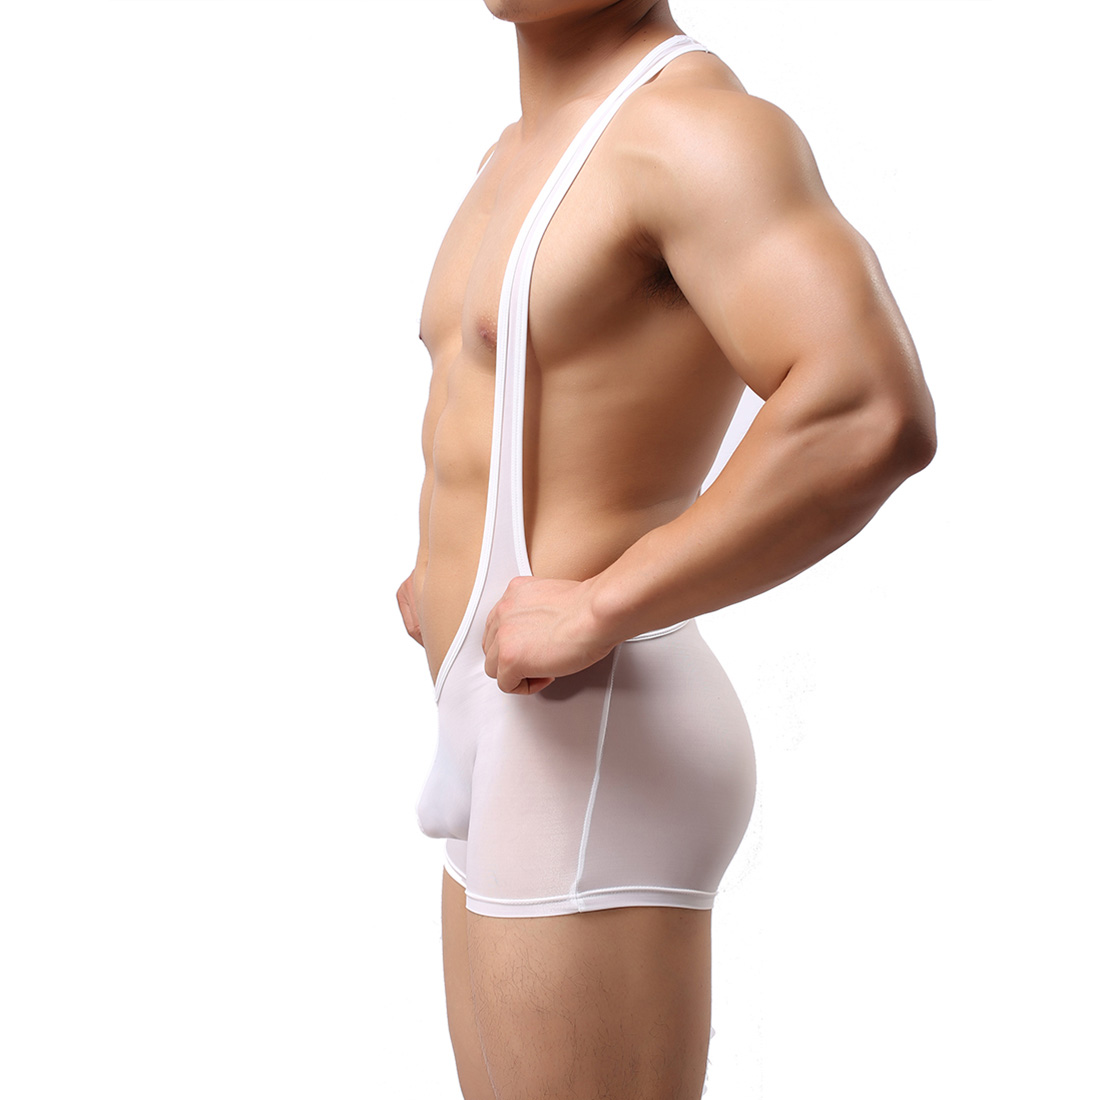 Men's Sexy Lingerie Underwear Sport Fitness One-pieces Swimsuit Wrestling Dress WH41 White XL